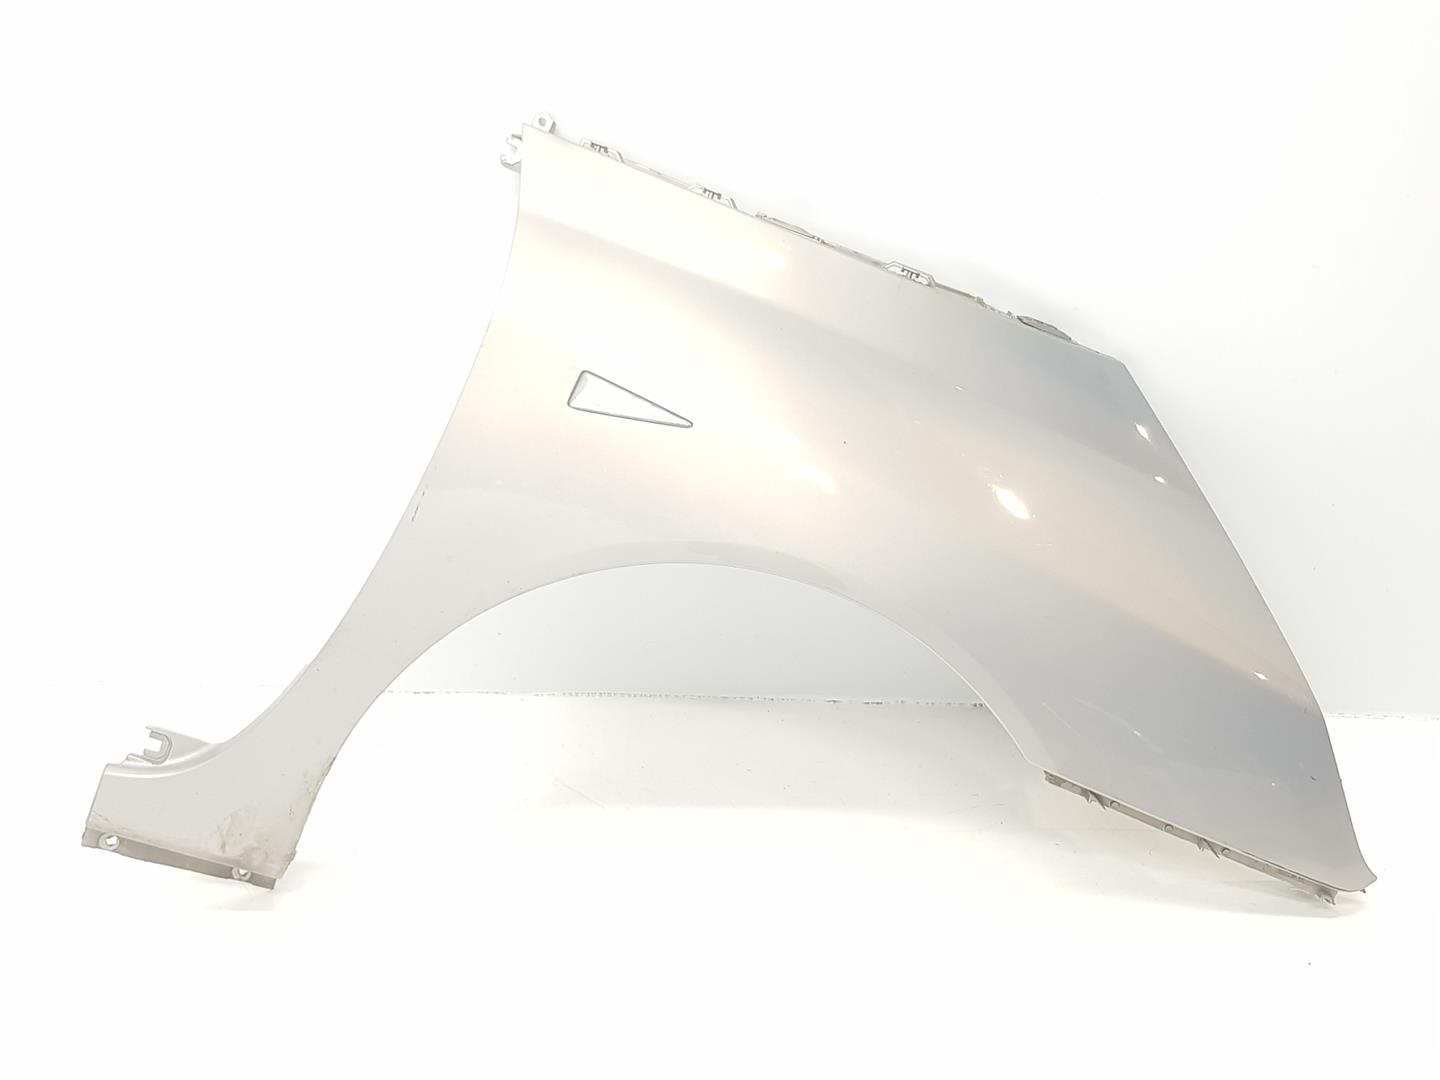 RENAULT Espace 4 generation (2002-2014) Front Right Fender 7701473587, 7701473587, COLORDORADOTEA19 19855331